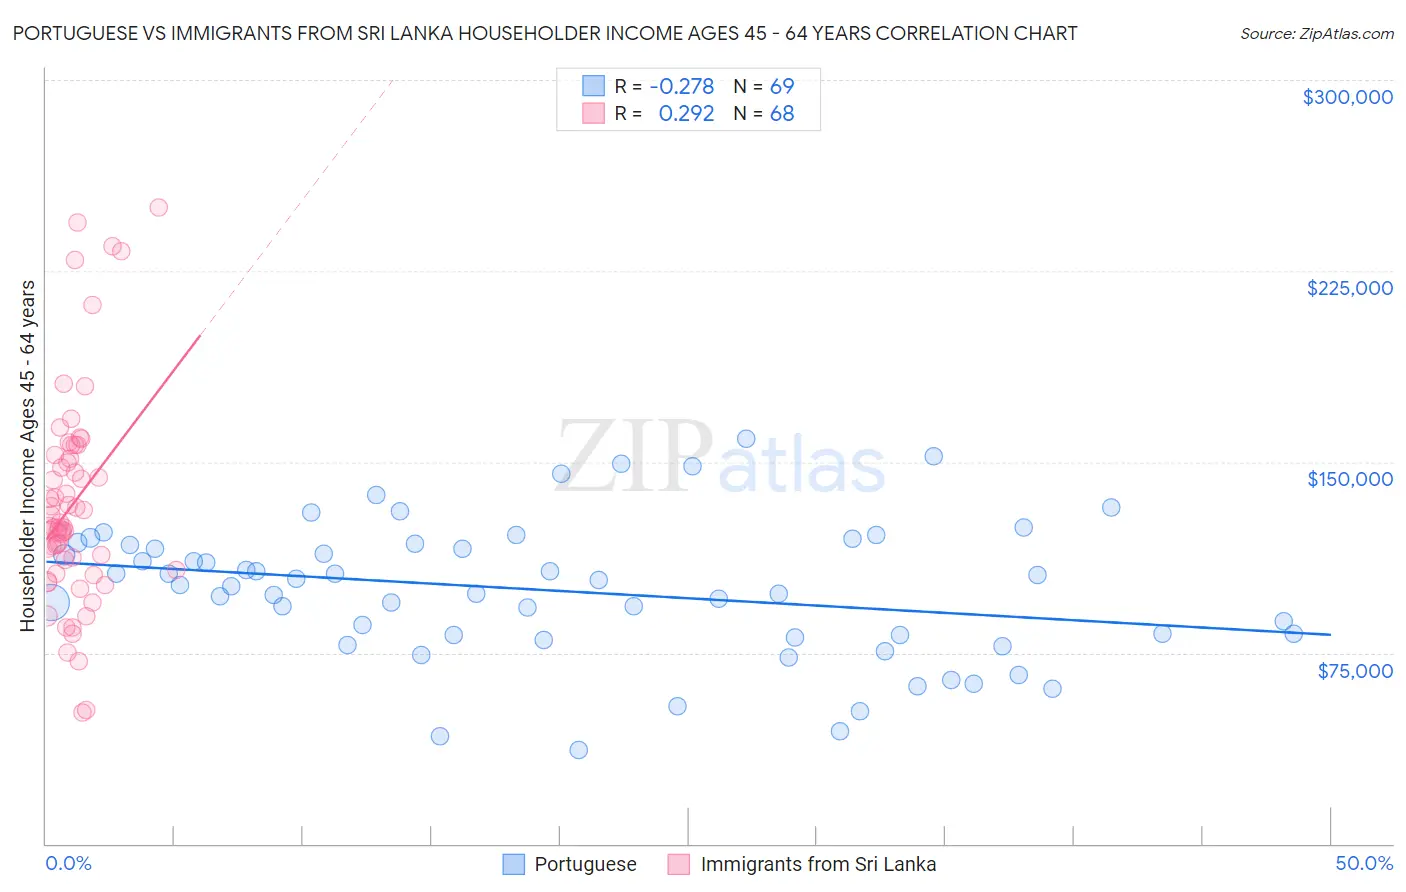 Portuguese vs Immigrants from Sri Lanka Householder Income Ages 45 - 64 years